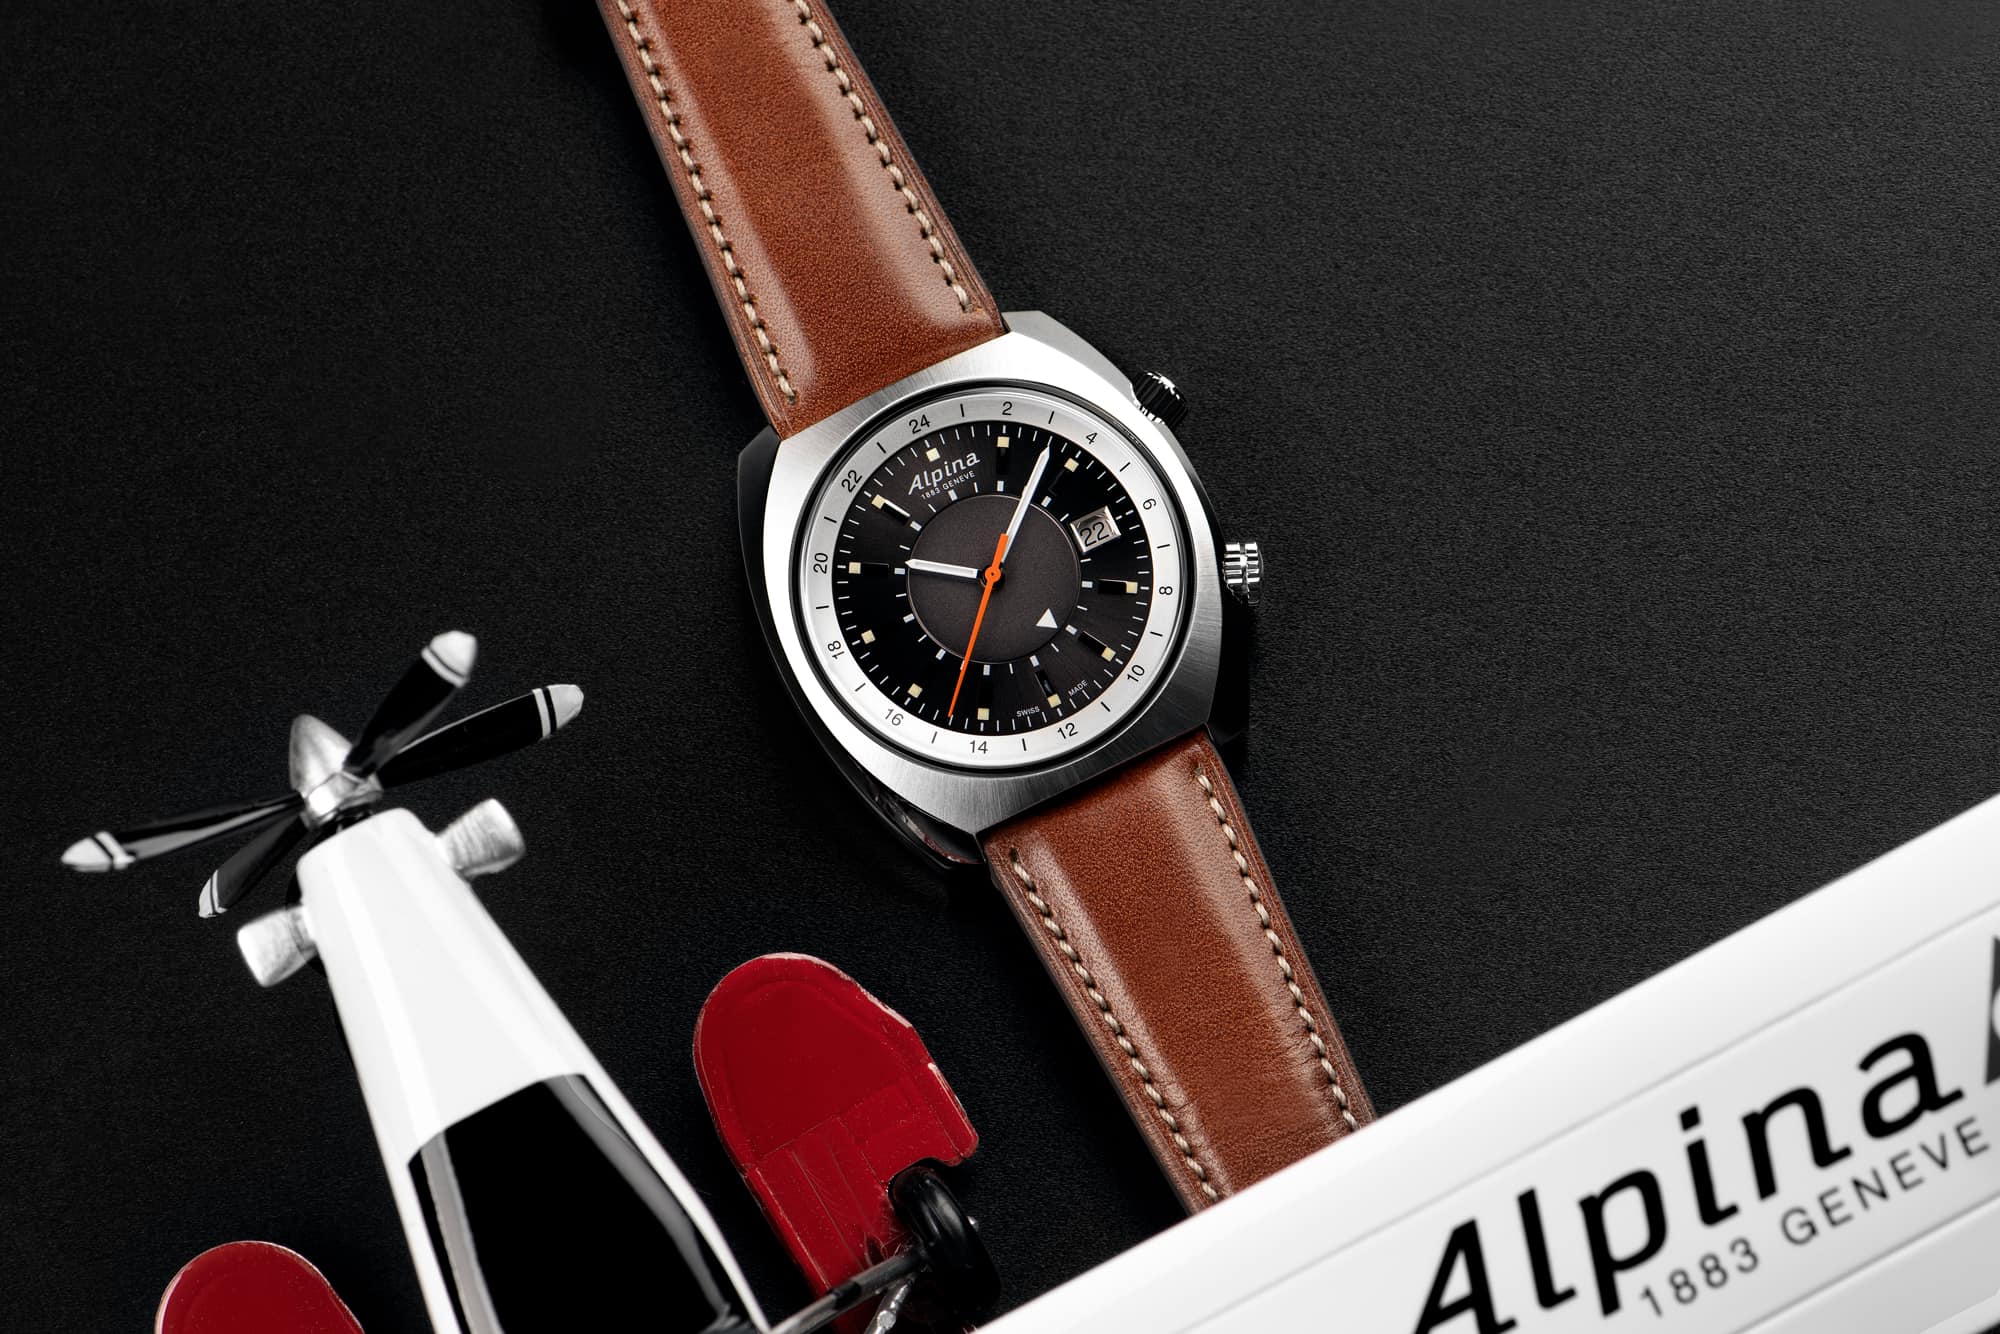 Introducing the Alpina Startimer Pilot Heritage Collection, A Value-Packed, “True-GMT” Traveler’s Watch